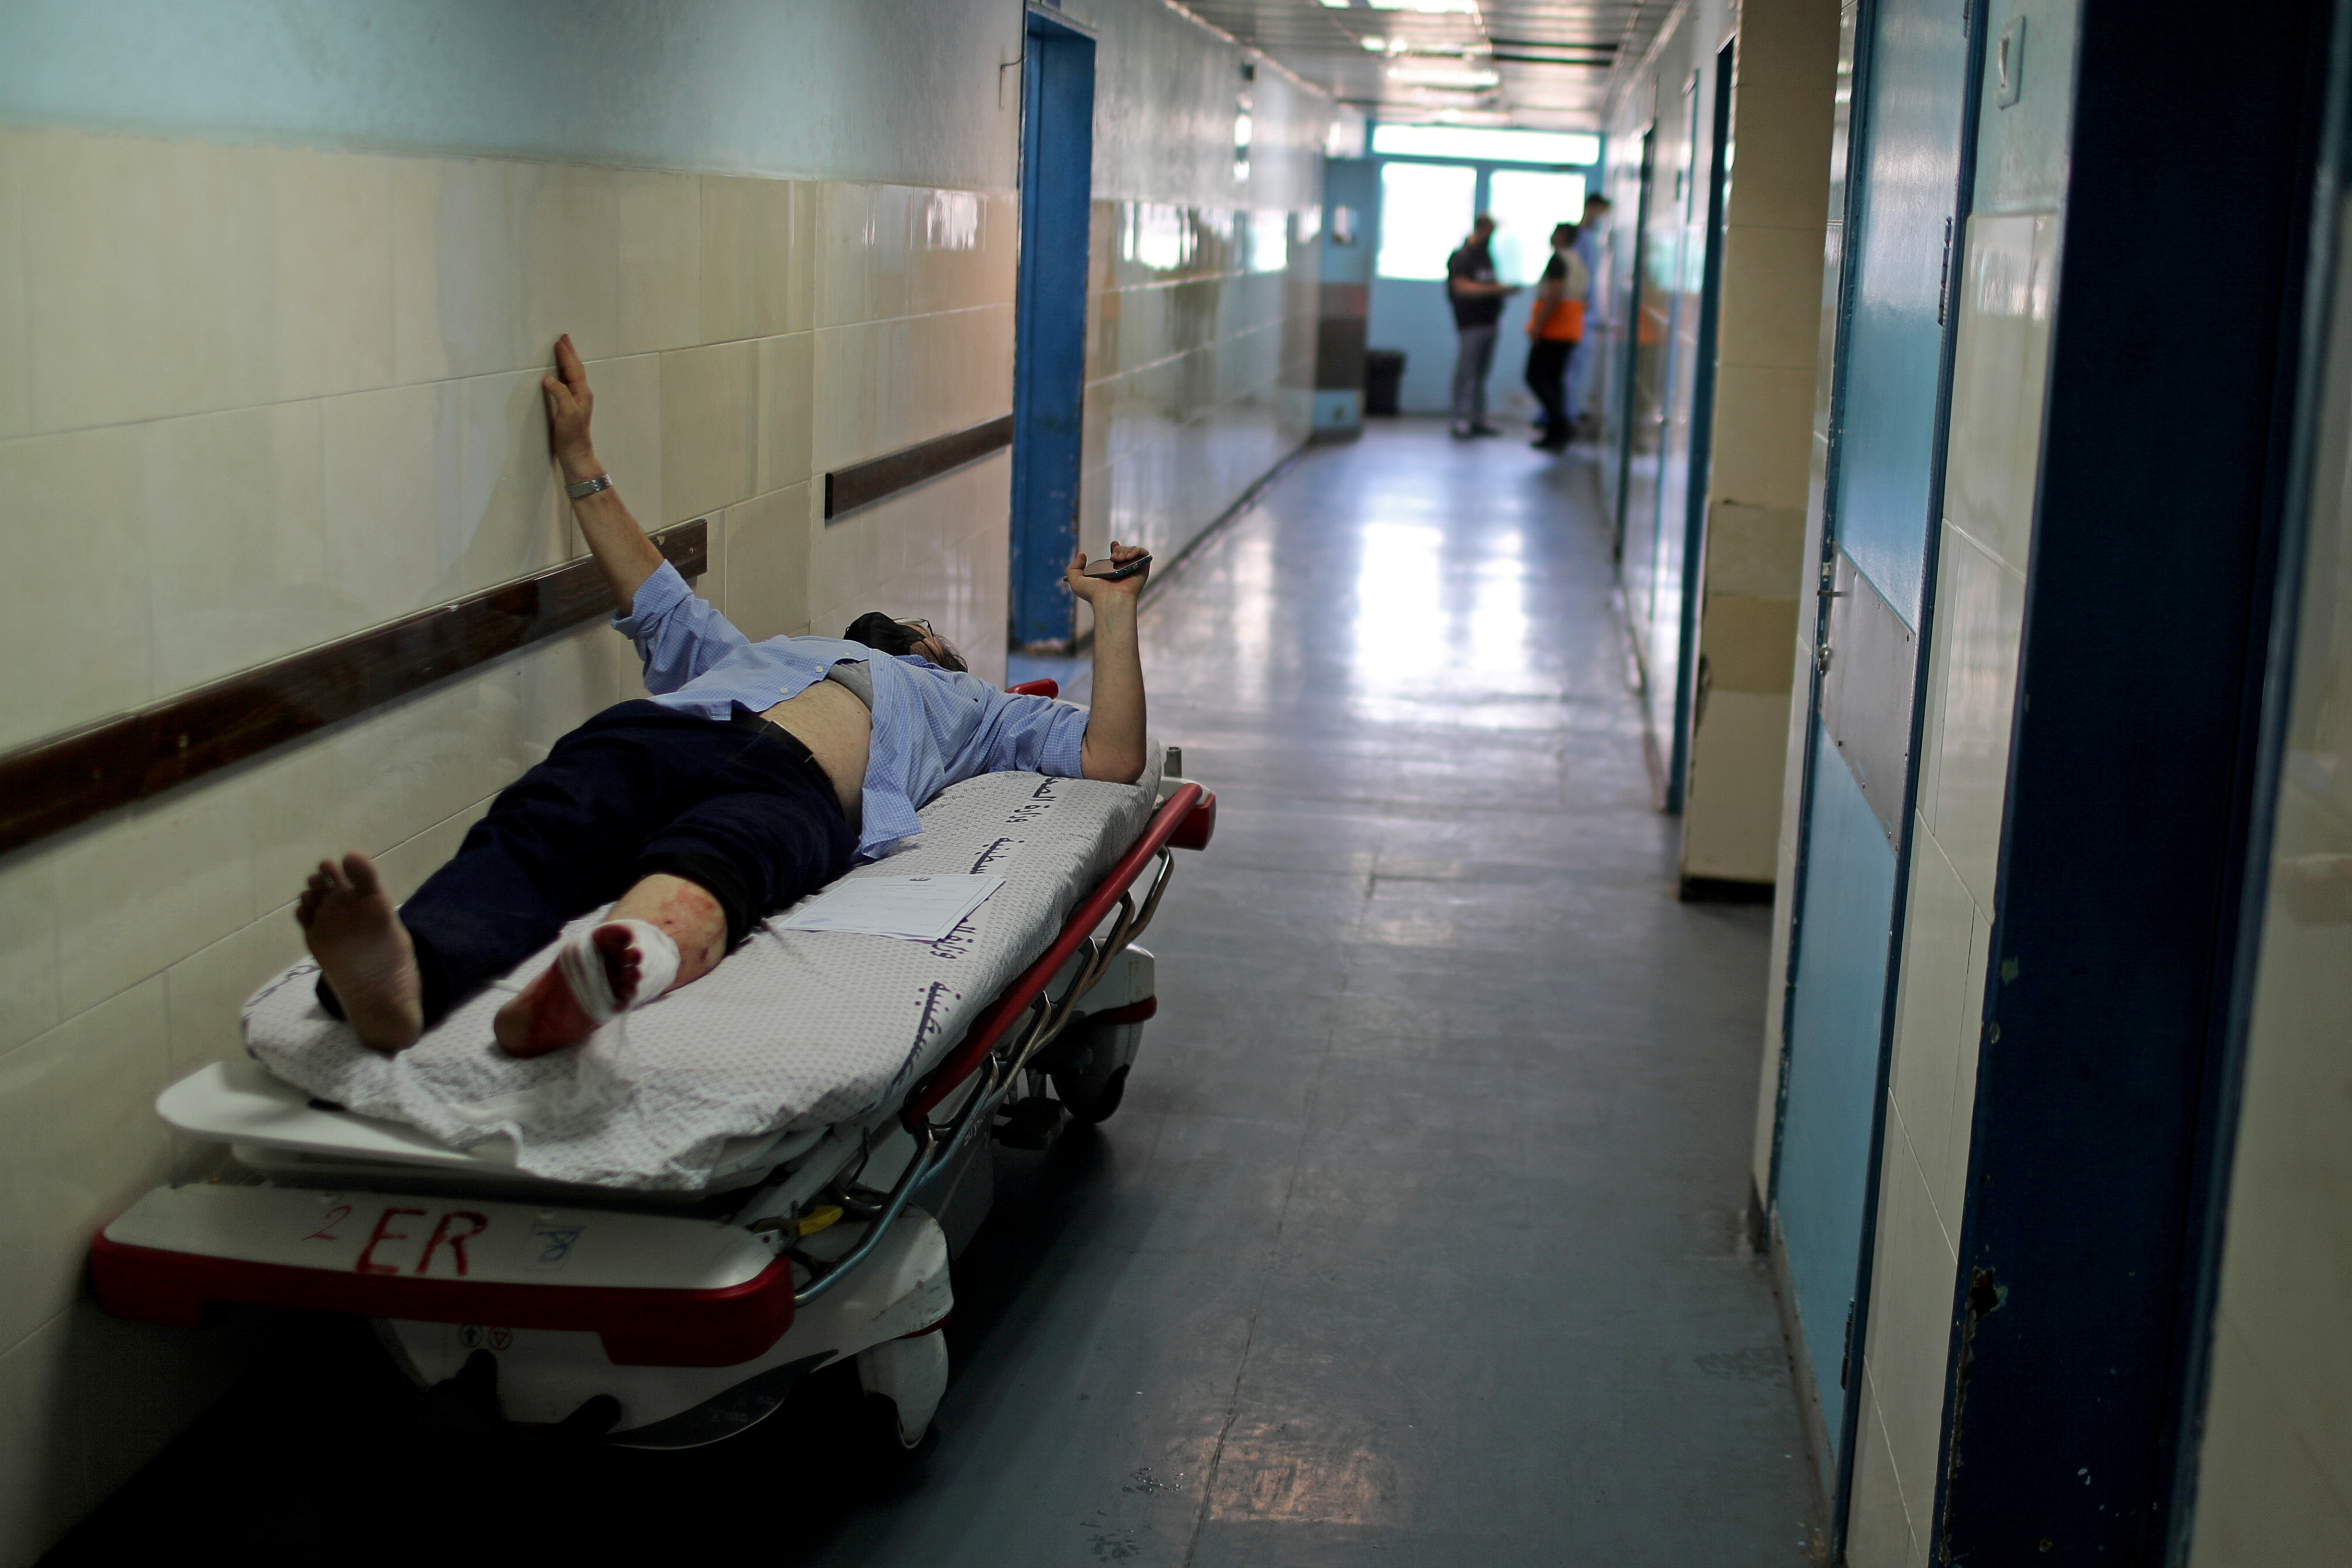 A wounded Palestinian man lies on a bed in Shifa hospital in Gaza City May 17, 2021. REUTERS/Mohammed Salem